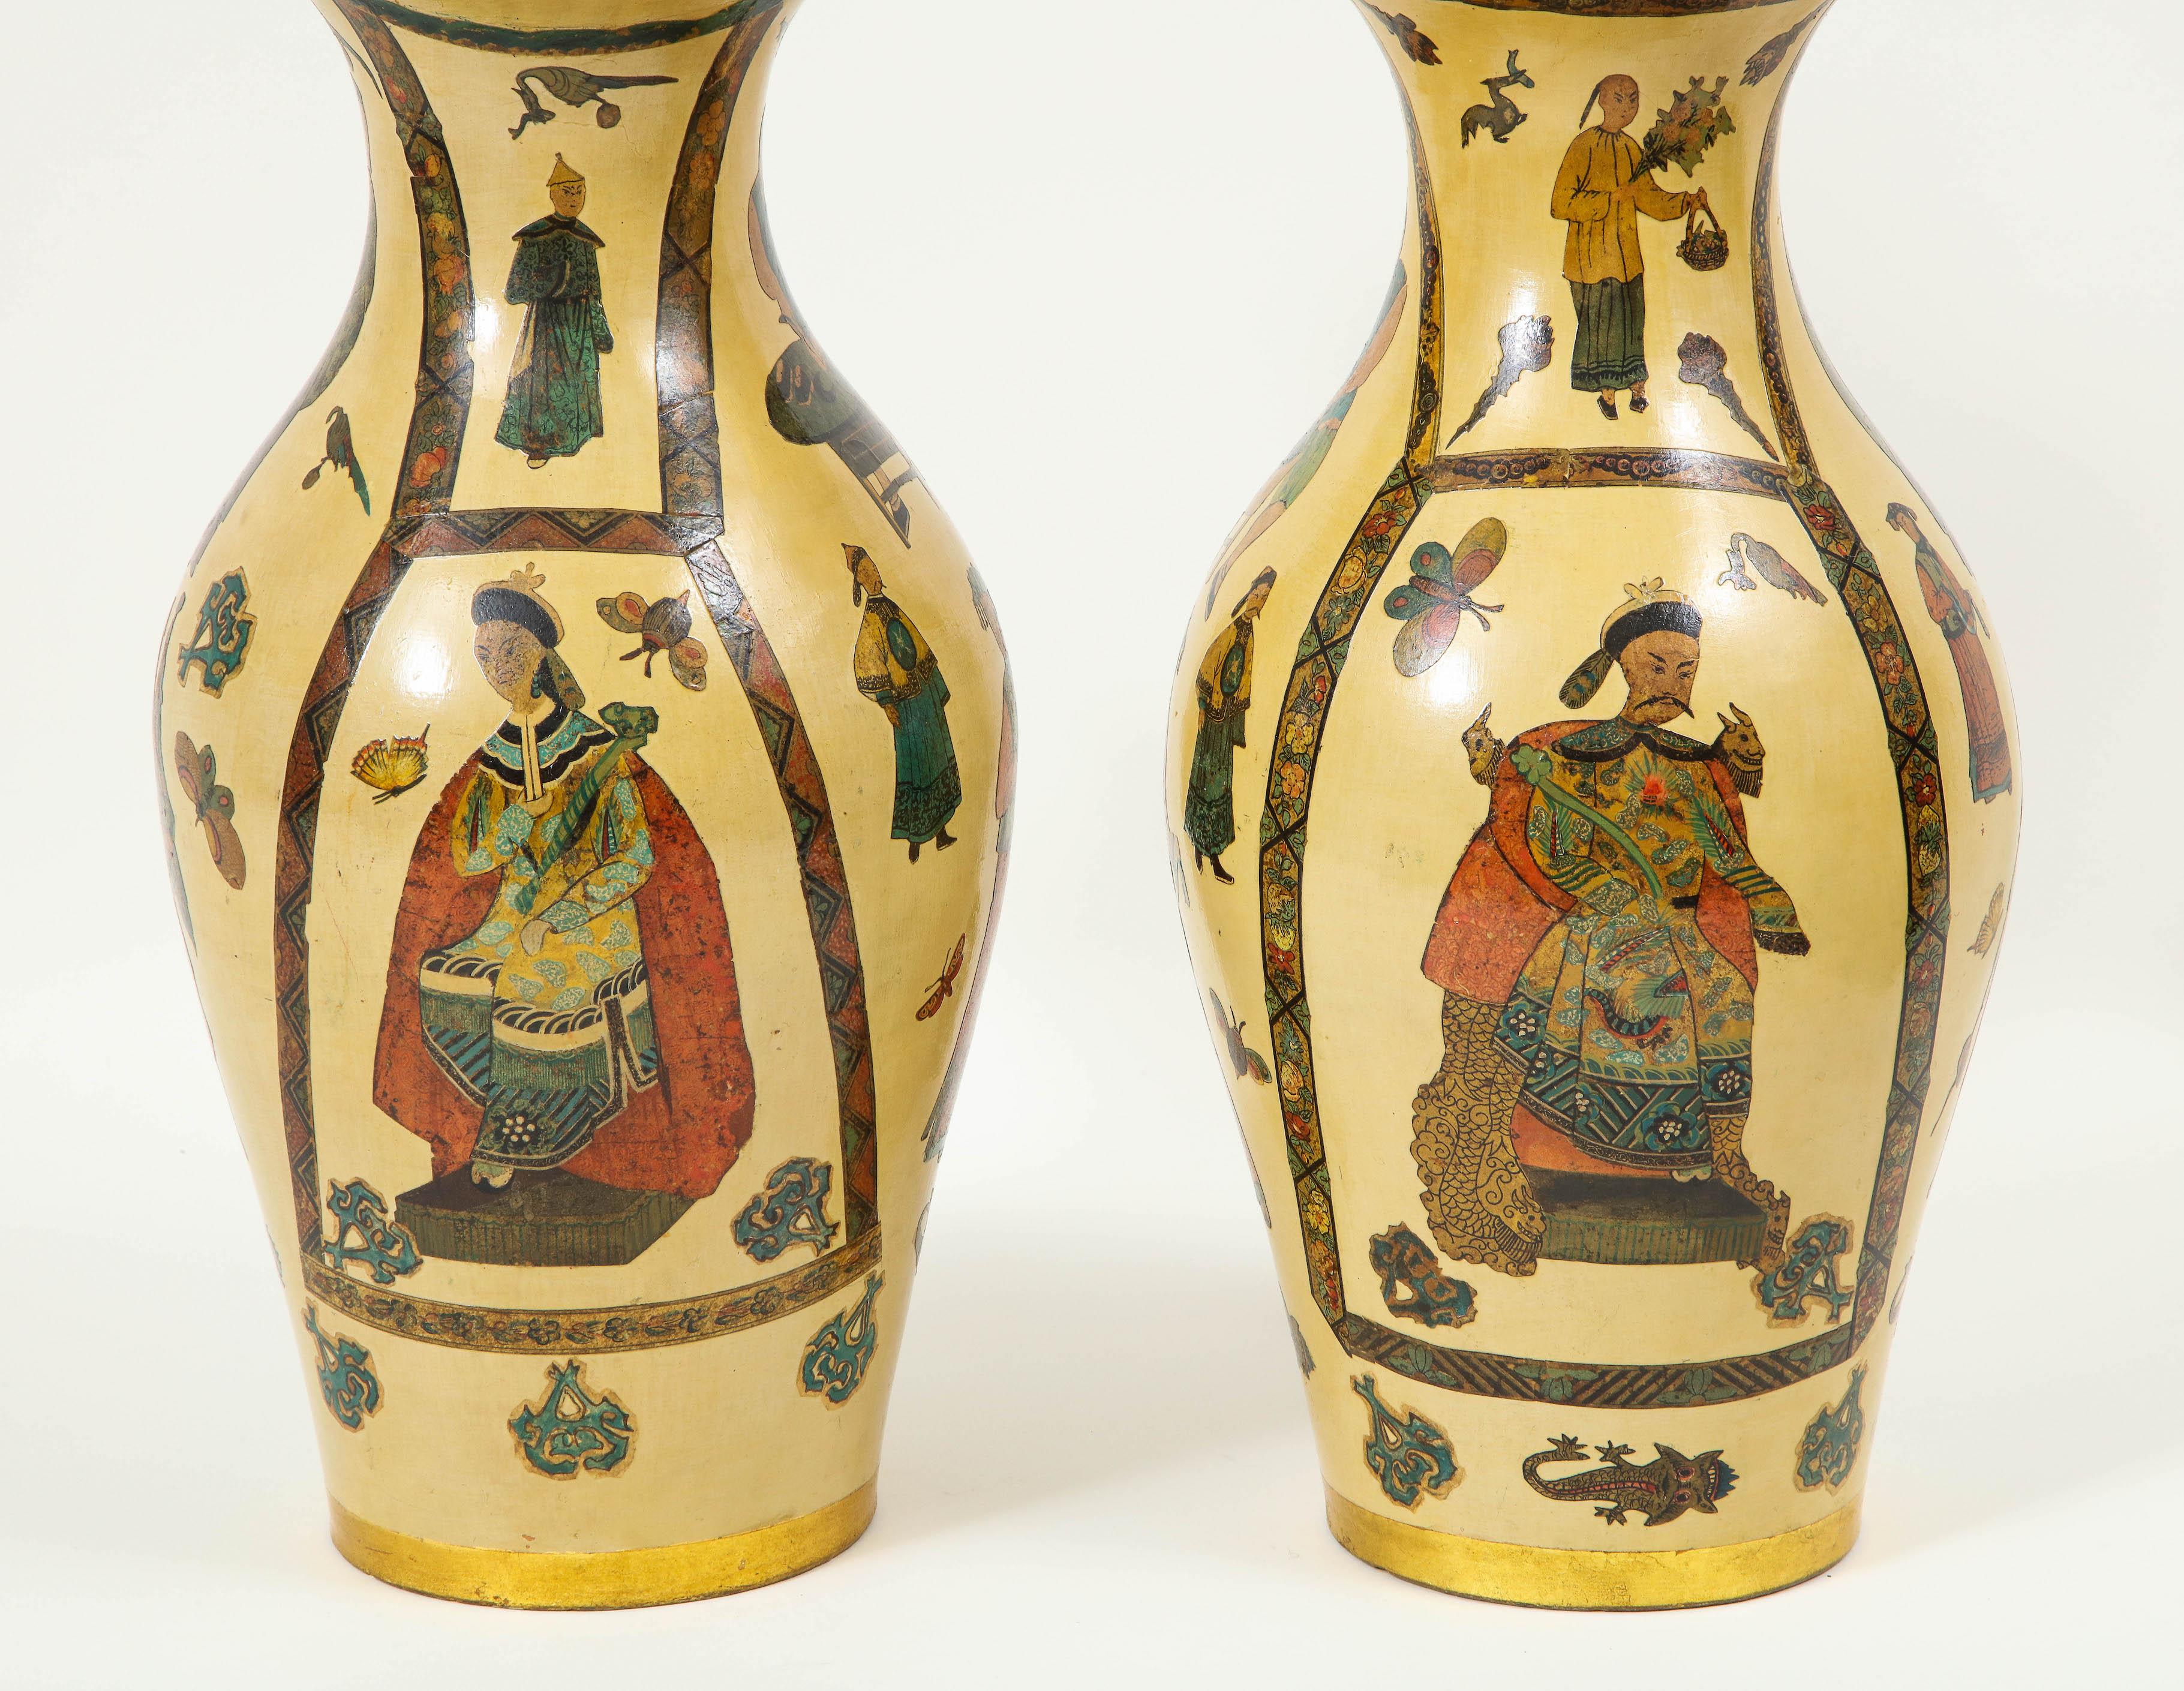 Each wooden lamp pained an ochre yellow and decoupaged with chinoiserie figures and emblems set within borders. Electrified at a later date. Height to top of lamp is 16.25